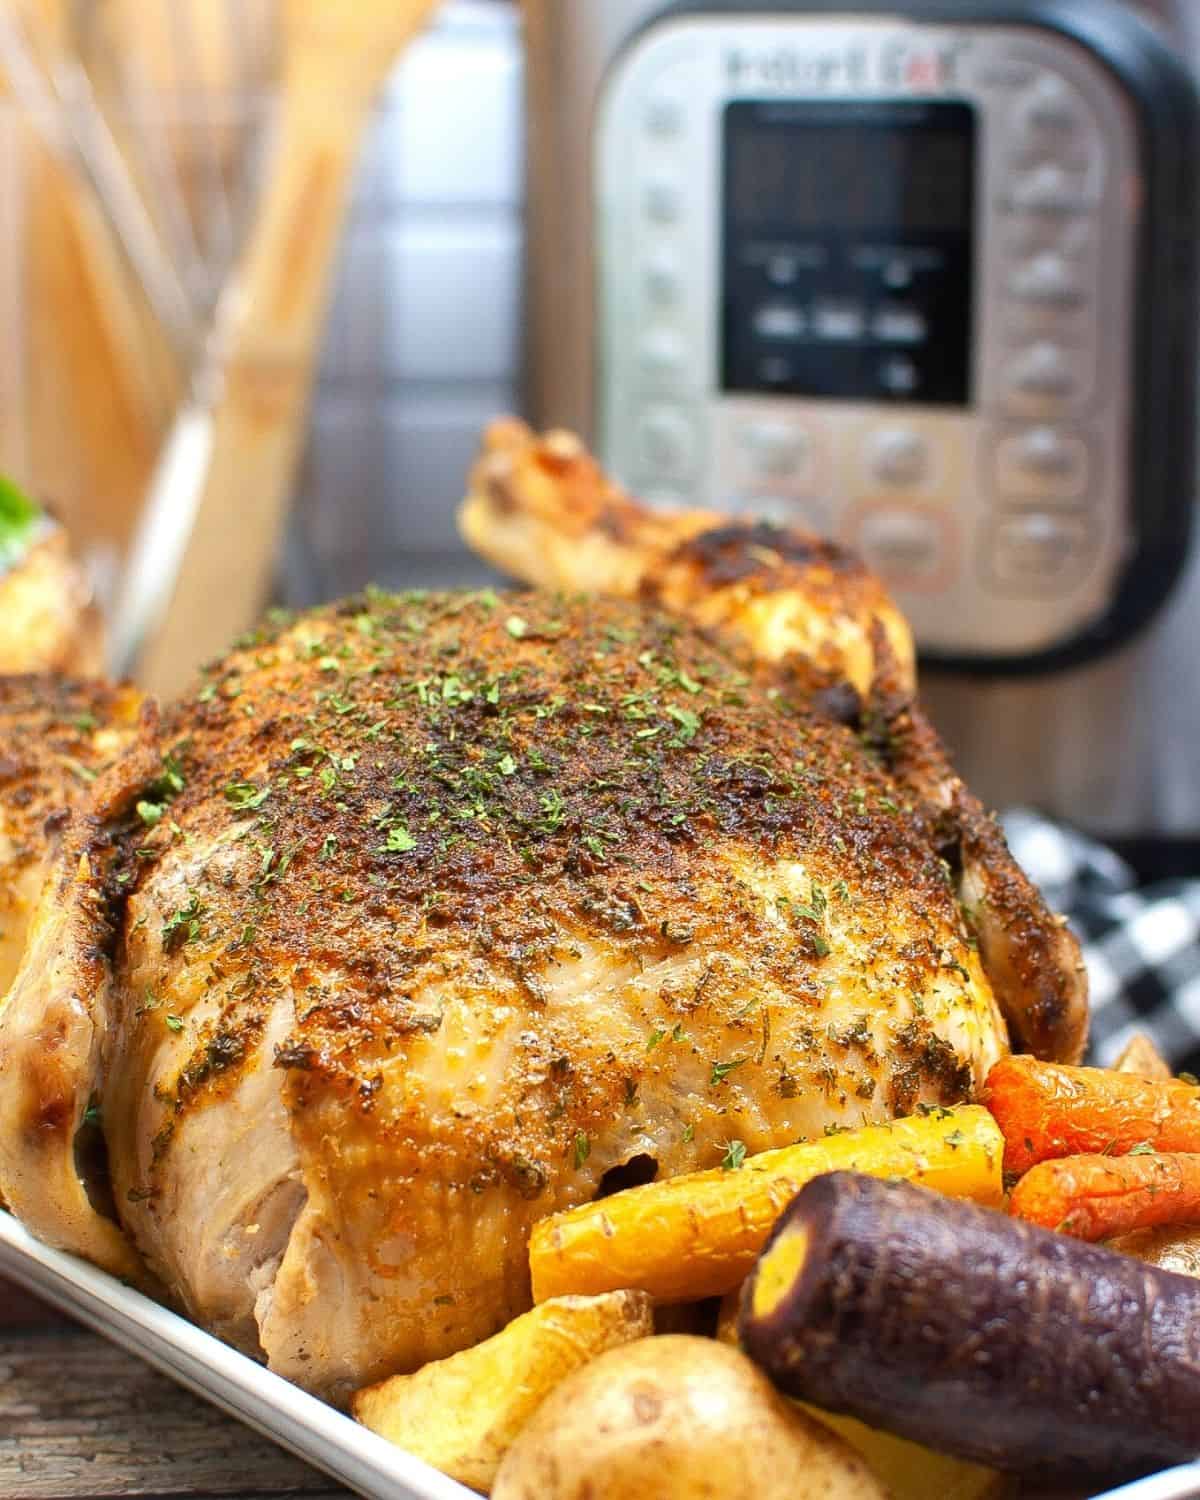 A roasted chicken that was made in the pressure cooker on a platter with carrots.